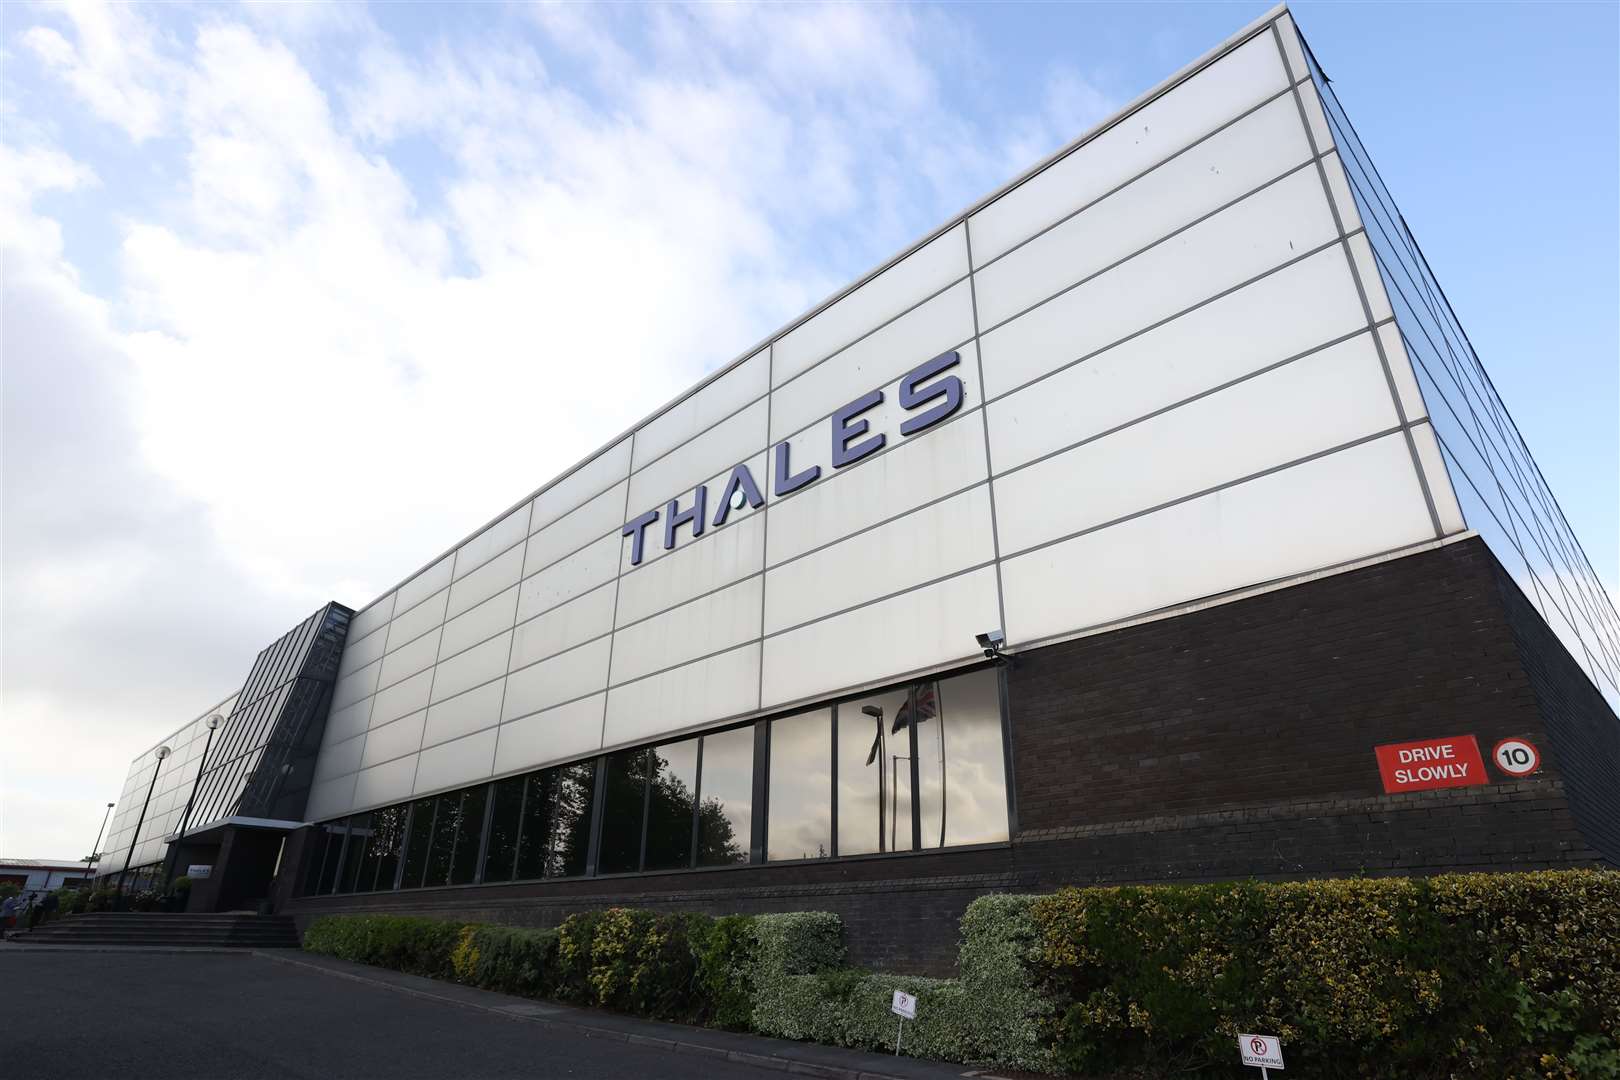 Thales was again targeted by protesters calling for a ceasefire in Gaza (PA)